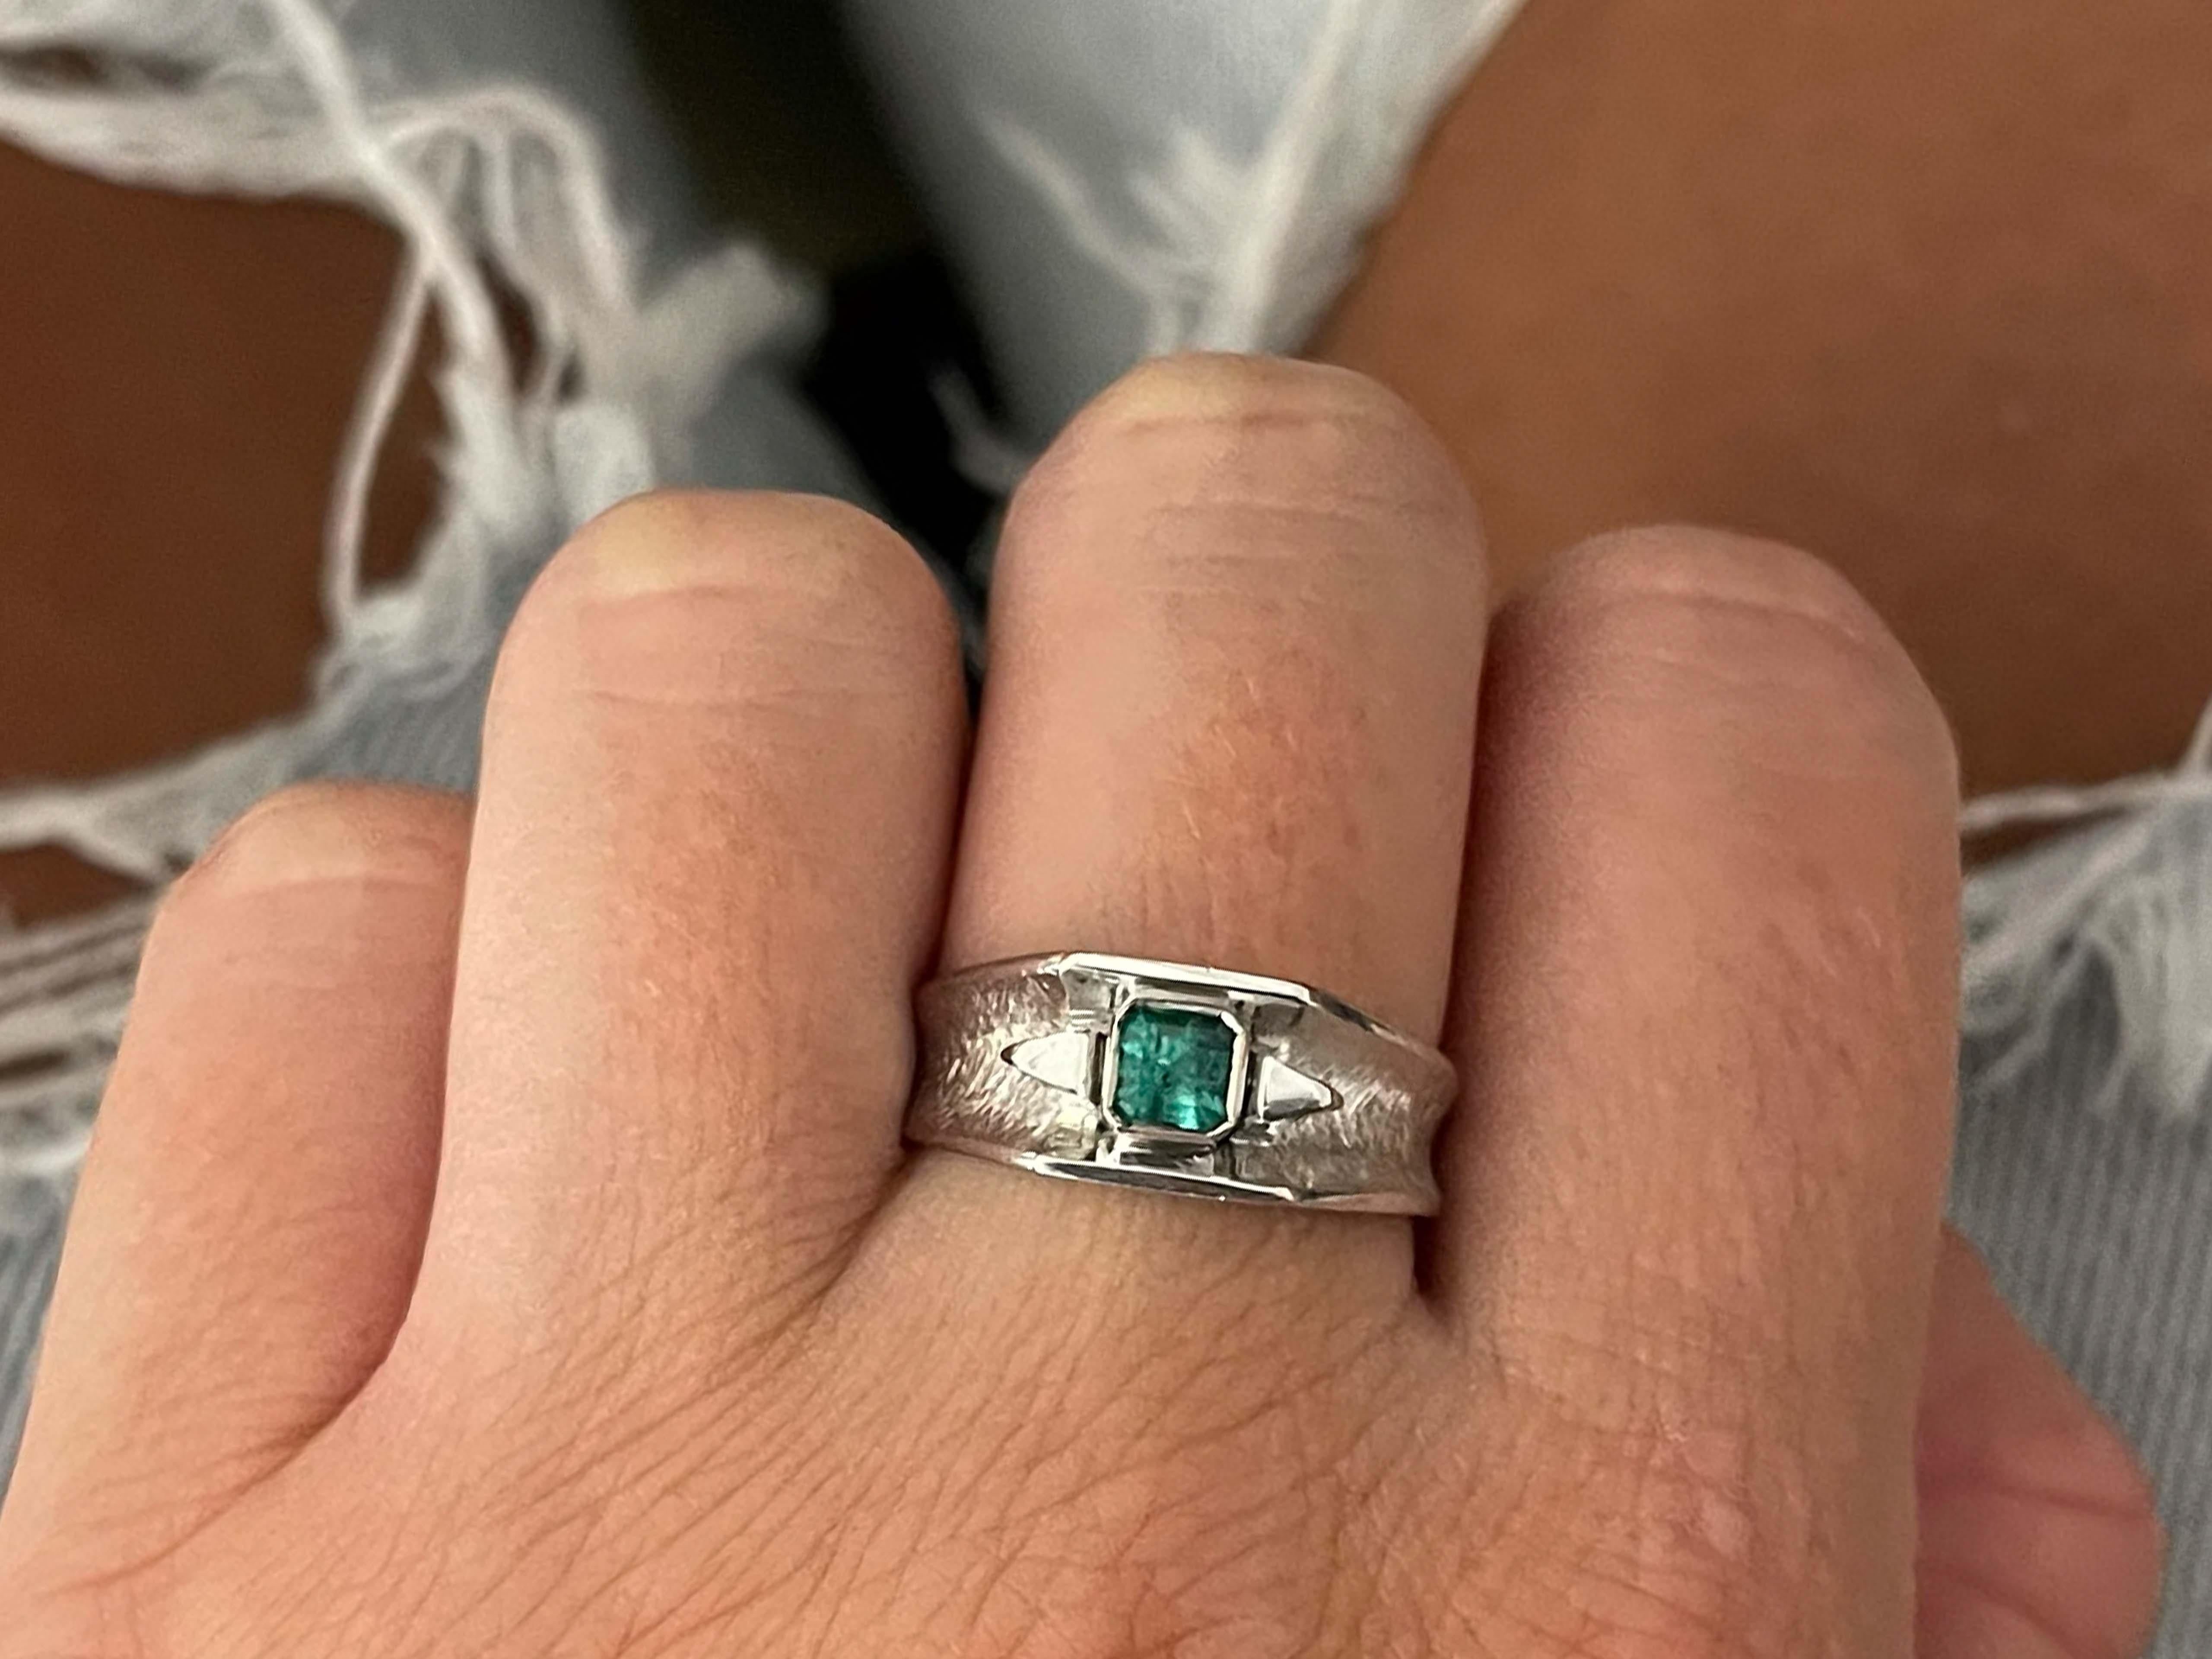 Item Specifications:

Metal: 18k White Gold

Style: Statement Ring

Ring Size: 9 (resizing available for a fee)

Total Weight: 8.3 Grams

Gemstone Specifications:

Gemstones: 1 green emerald

Colombian Emerald Carat Weight: ~0.40 carats

Shape: